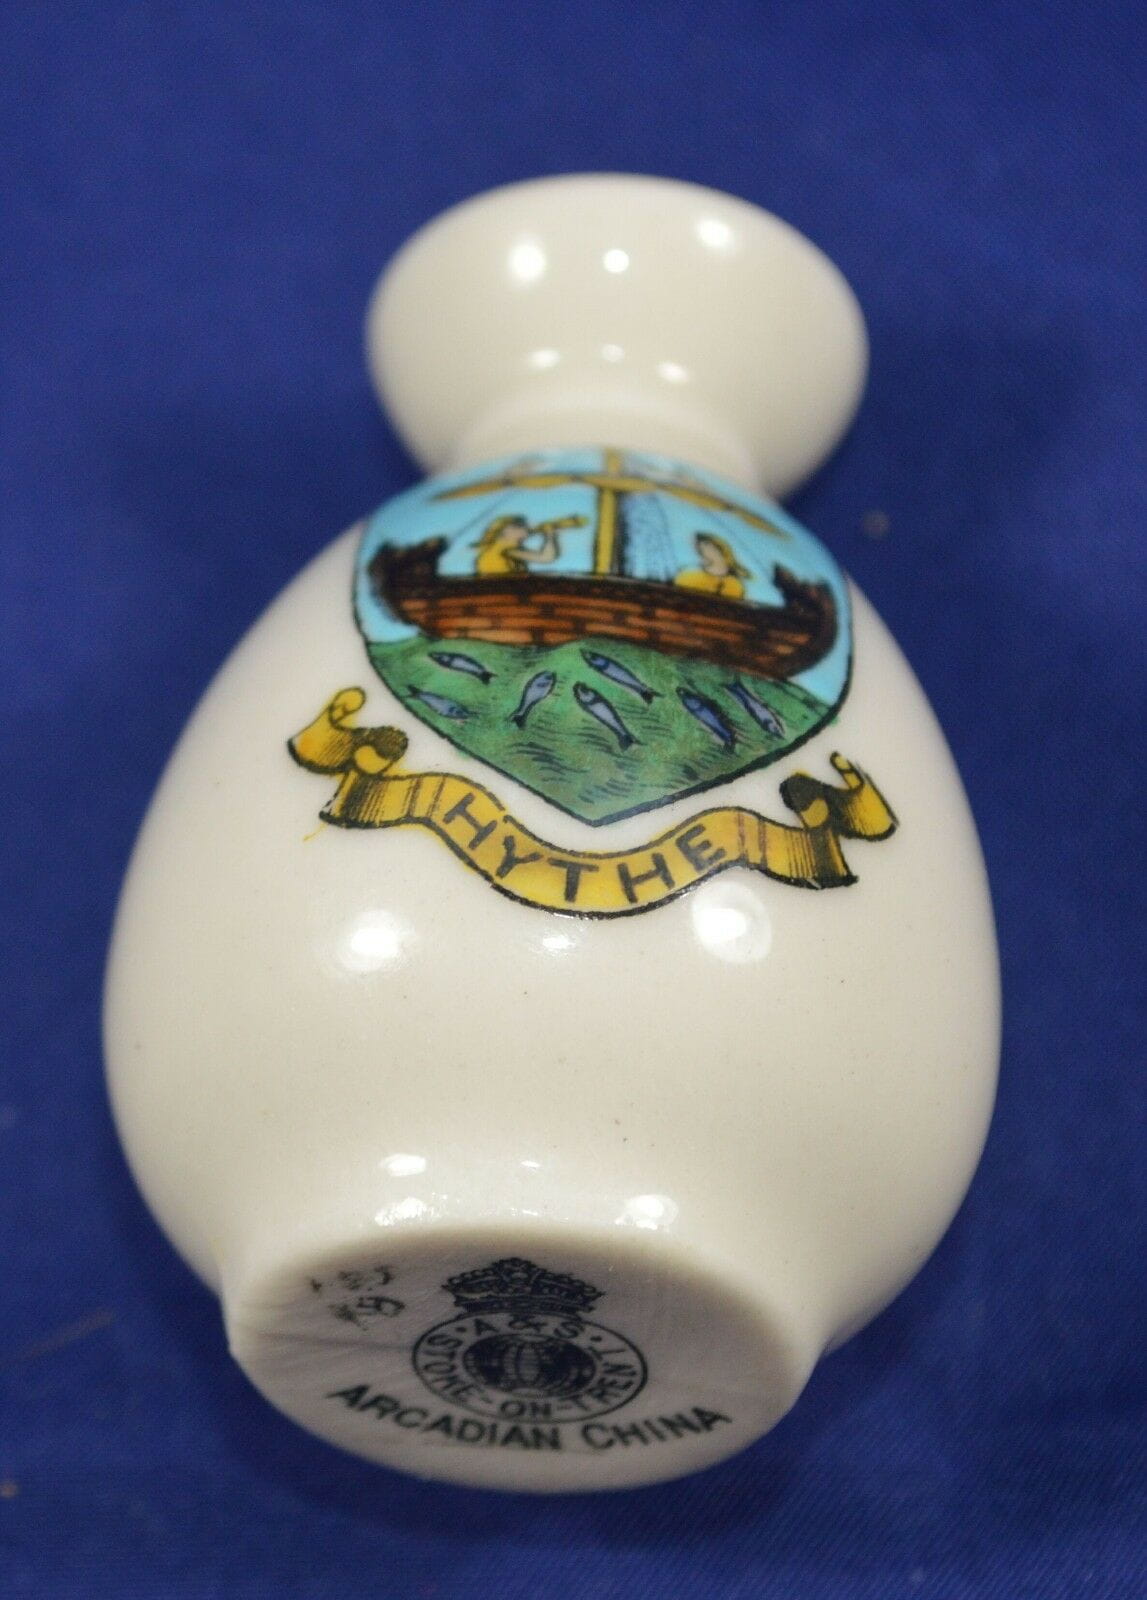 ARCADIAN CRESTED WARE CHINA VASE HYTHE COAT OF ARMS(PREVIOUSLY OWNED) GOOD CONDITION - TMD167207